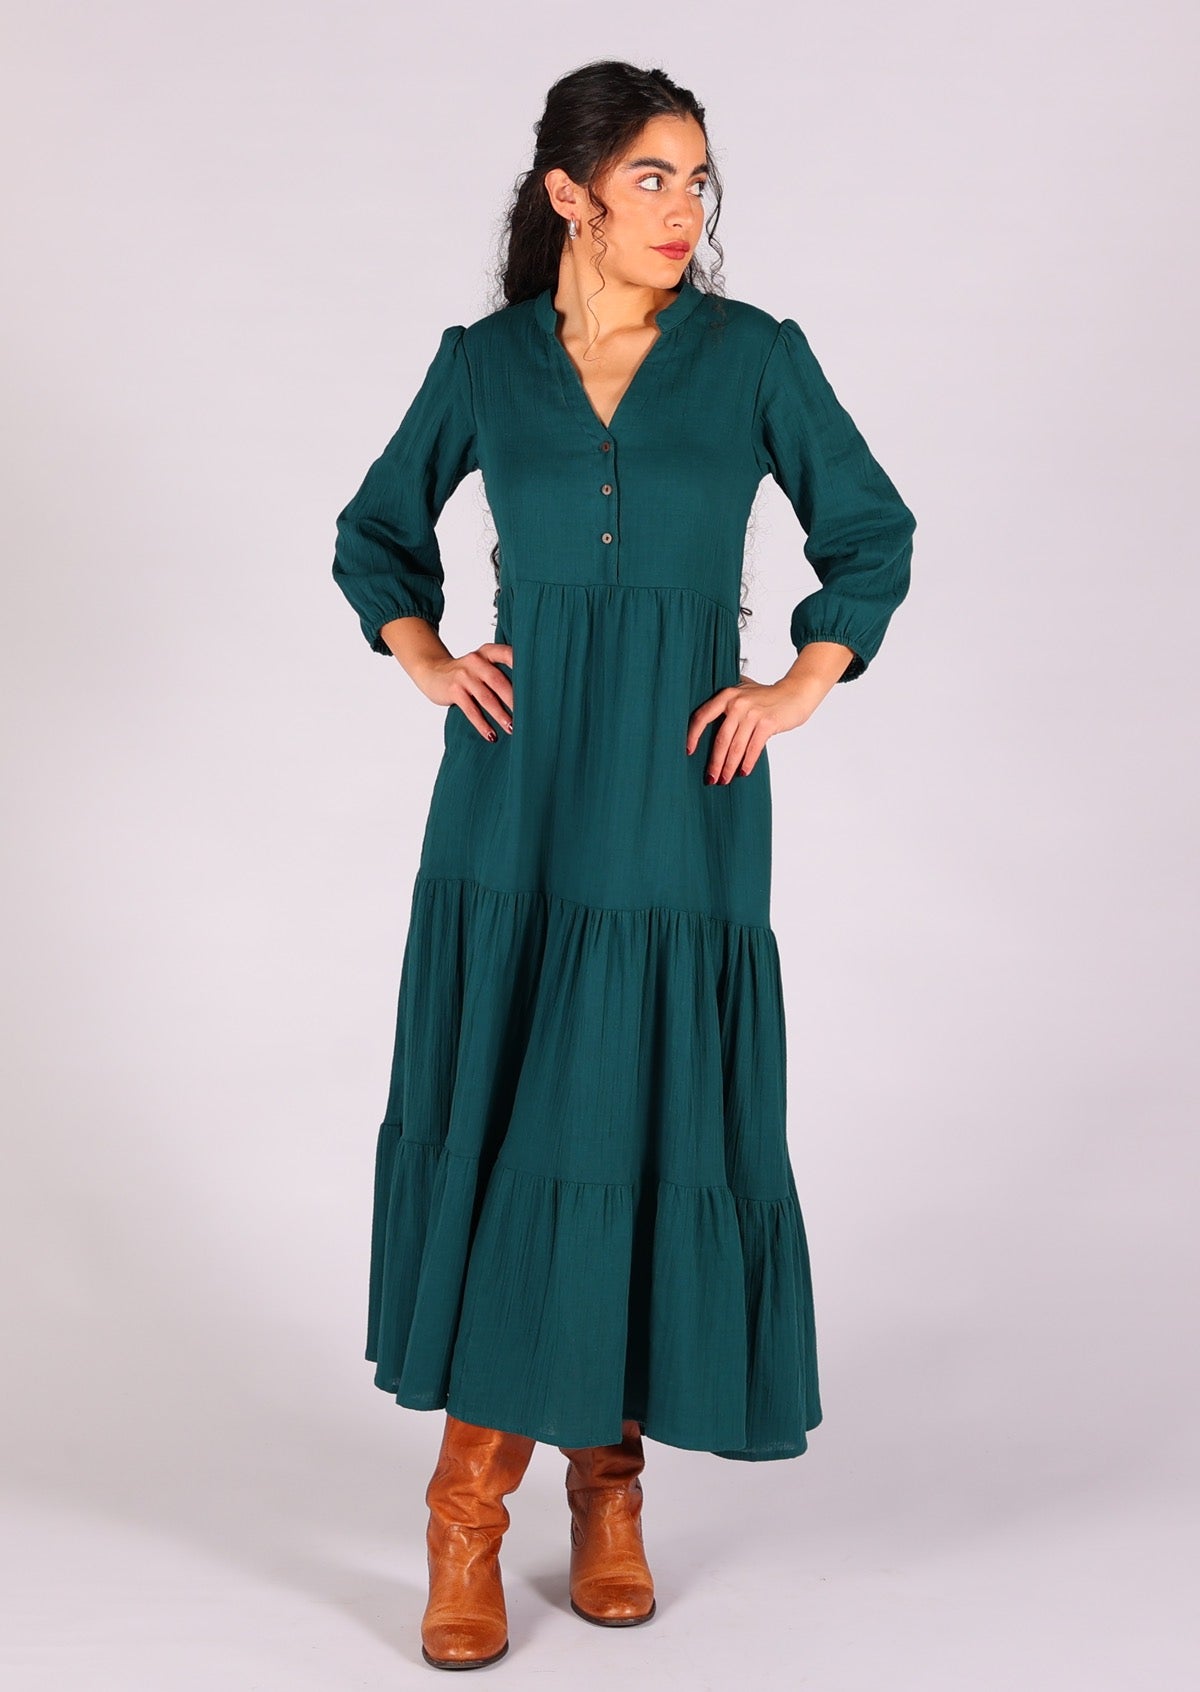 Beautiful deep teal double cotton tiered maxi dress with buttoned bodice that has V-neckline and mandarin collar